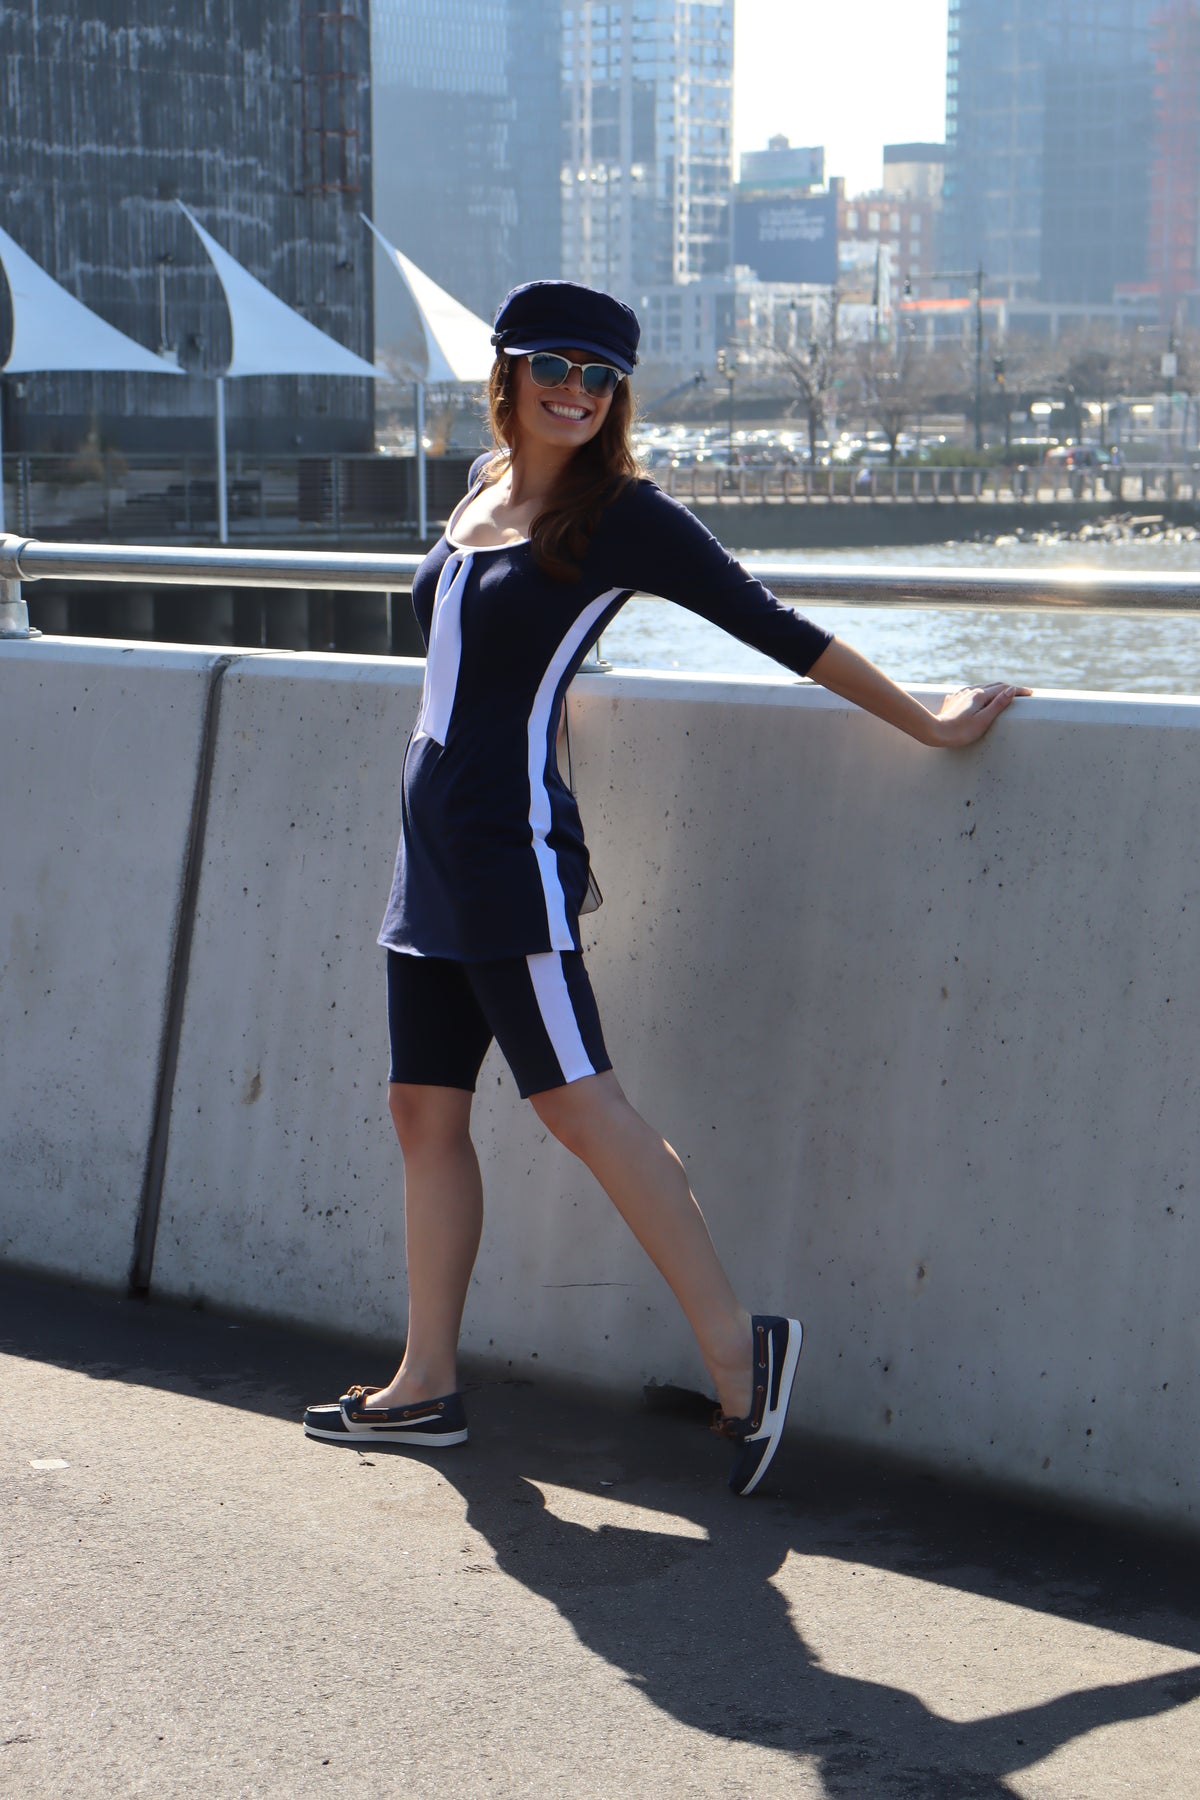 Model wearing navy bike shorts with white stripes down the sides, navy with white stripes down the sides, 3/4 sleeves and a white tie tunic and a blue hat smiling in front of the water, reaching back.